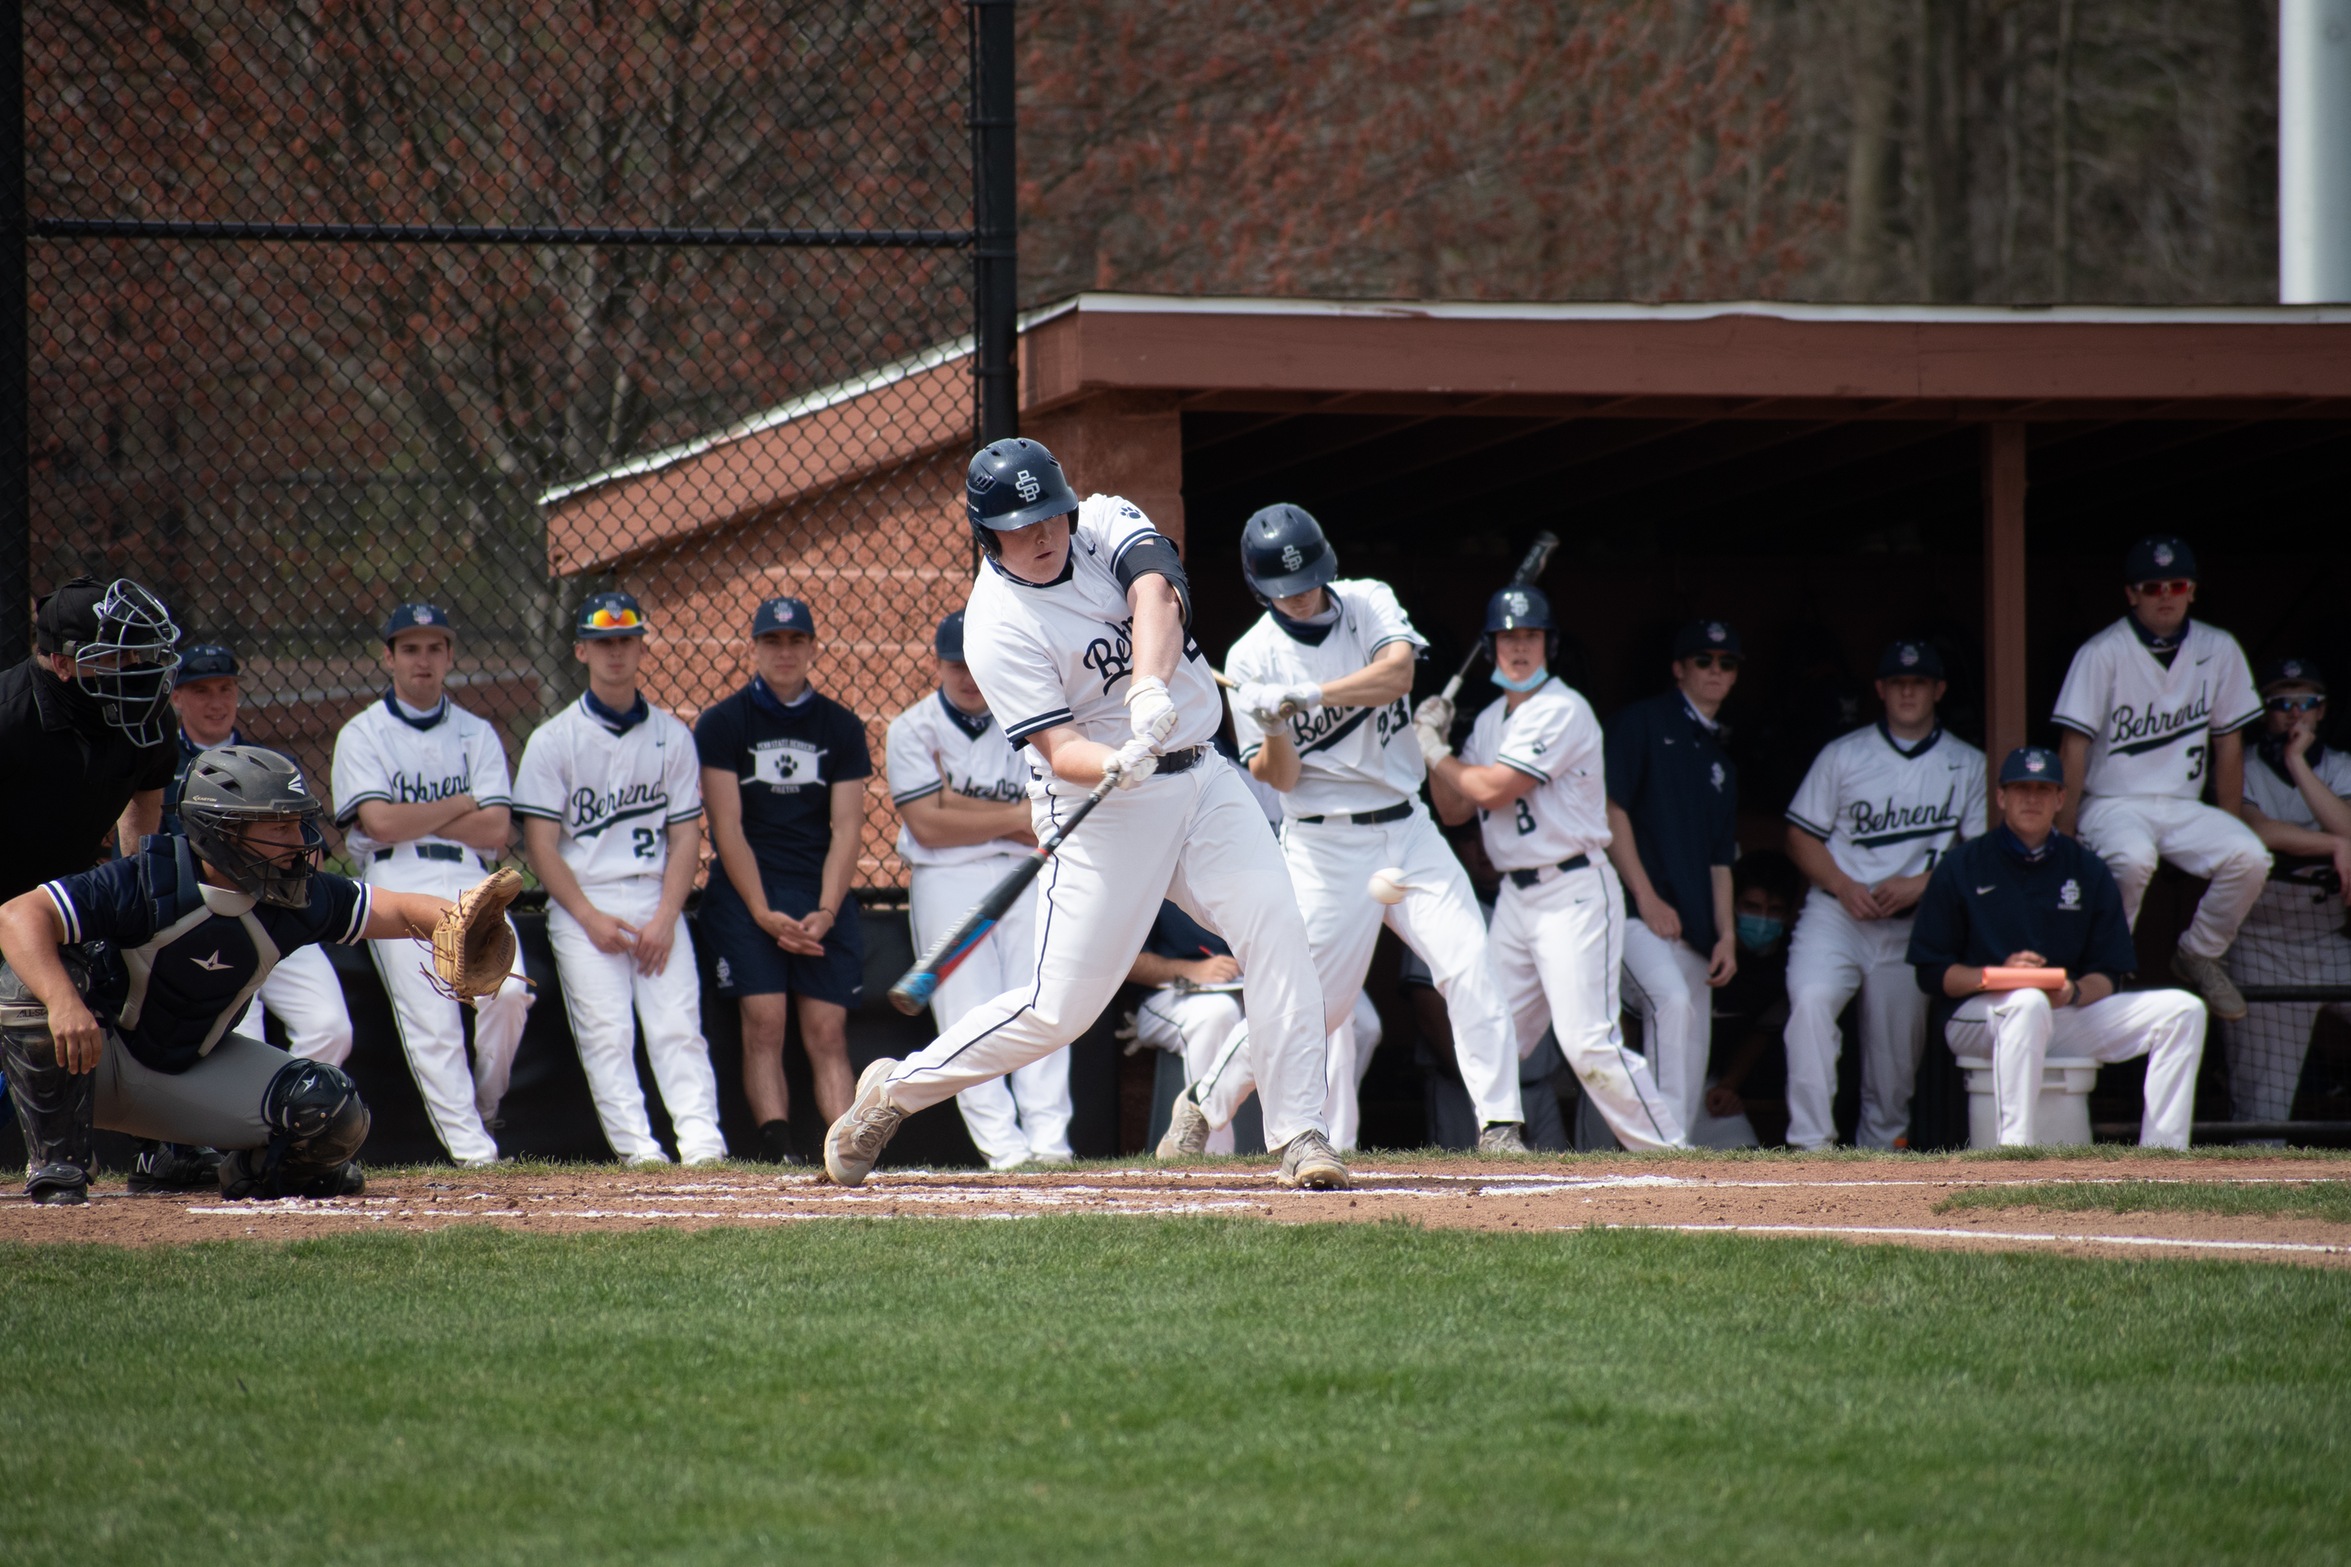 Behrend Baseball Sweeps Altoona; Wagner Collects 100th Career Hit